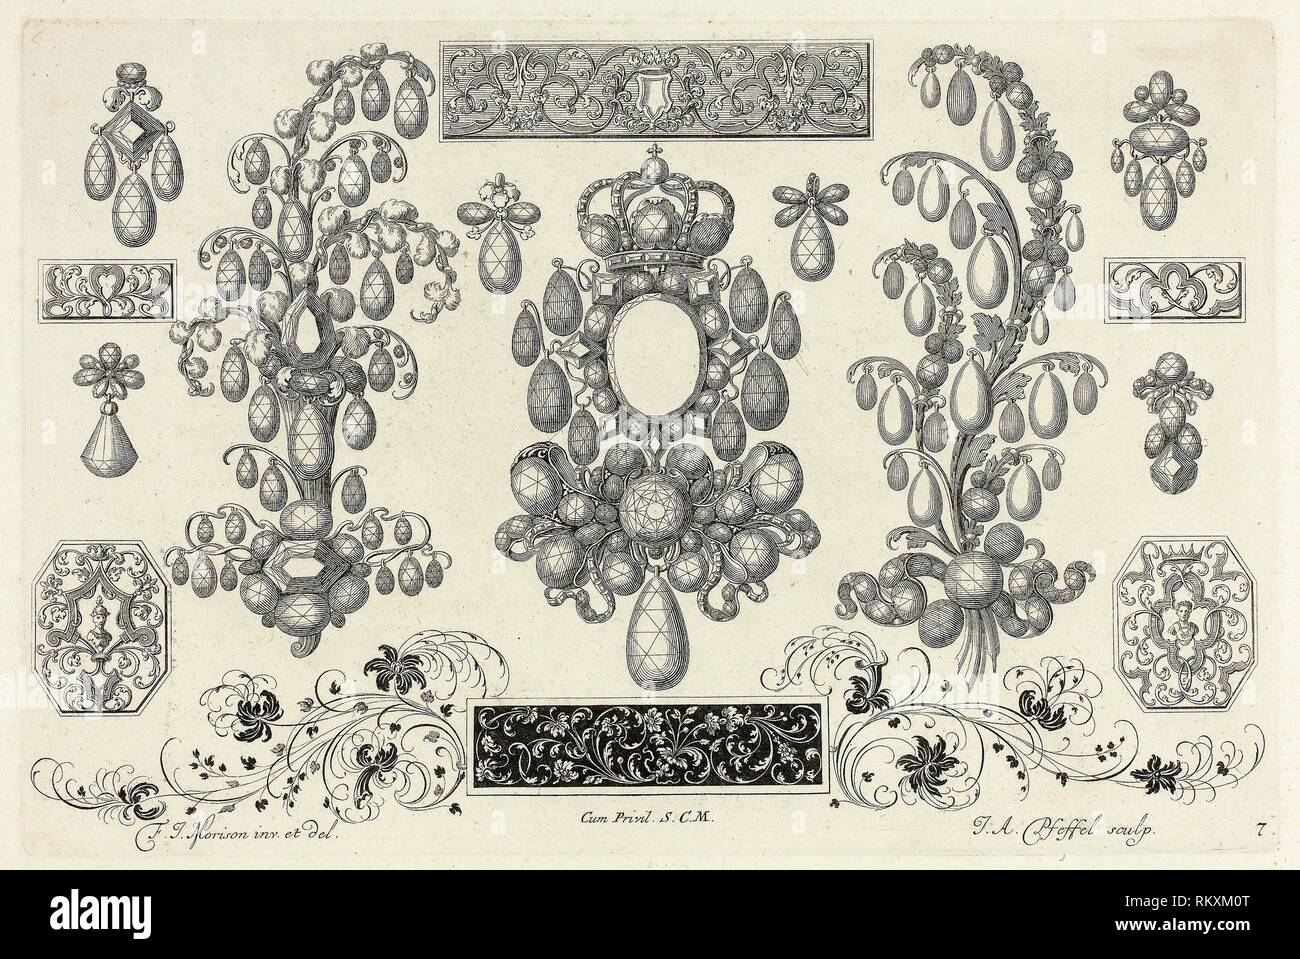 Designs for Jewelry - before 1697 - Joannes Andreas Pfeffel I (German, 1674-1748) after Friedrich Jacob Morisson (German, active 1693-1697) - Artist: Stock Photo